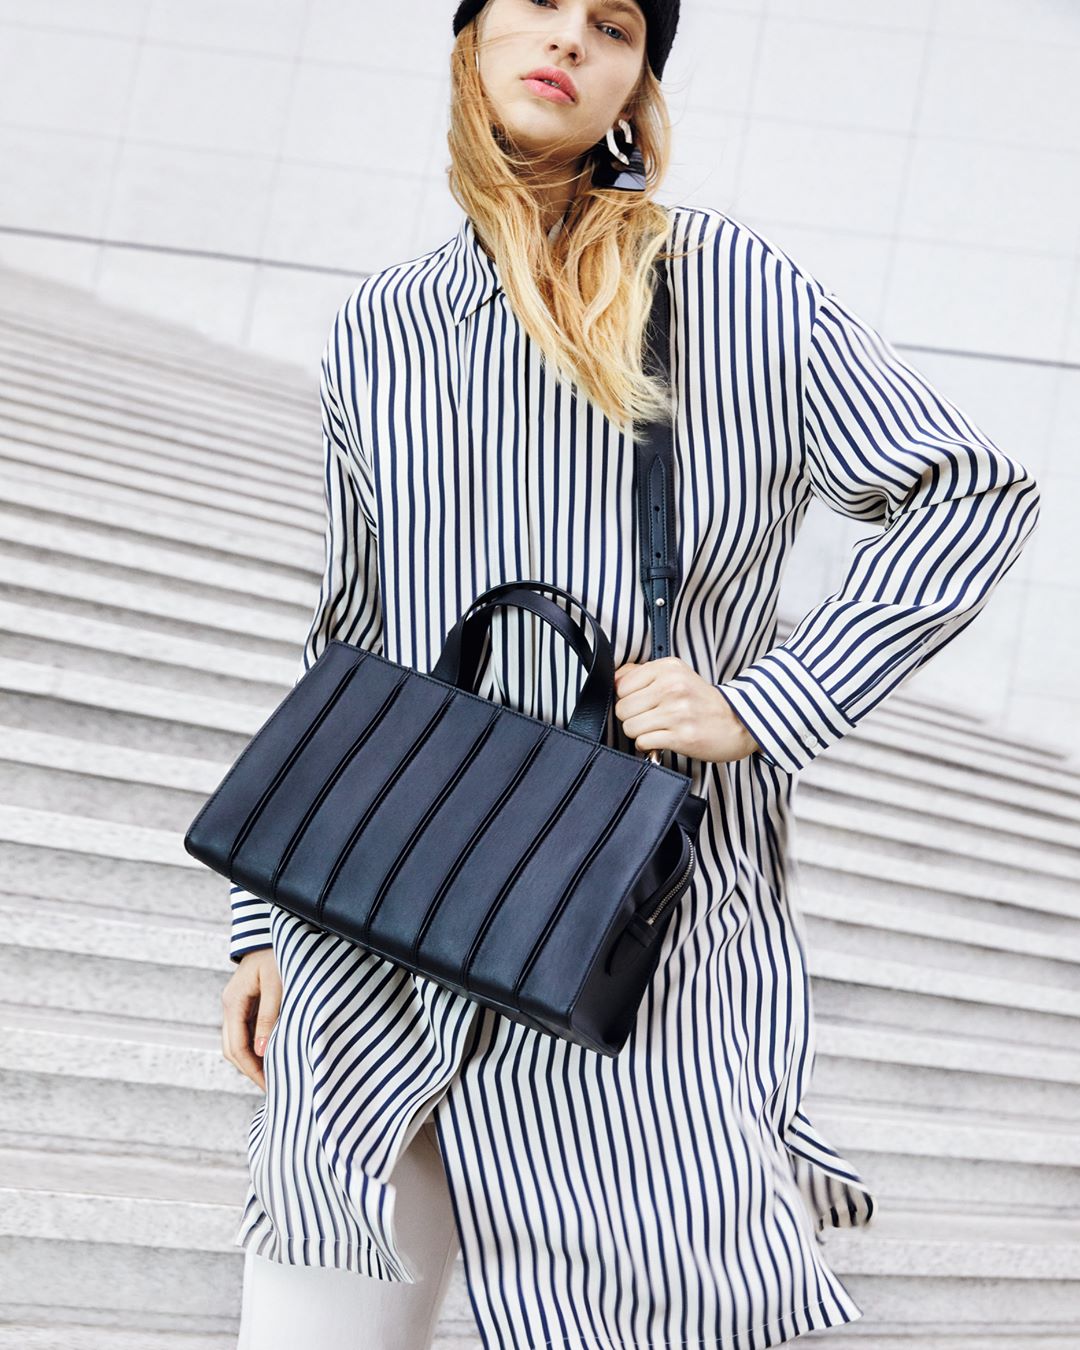 Max Mara - Leading lines. Liven up your ensemble with the signature #MaxMaraFW20 #WhitneyBag Design by Renzo Piano Building Workshop for an effortlessly chic look.⁣
⁣
#MaxMara #FW20